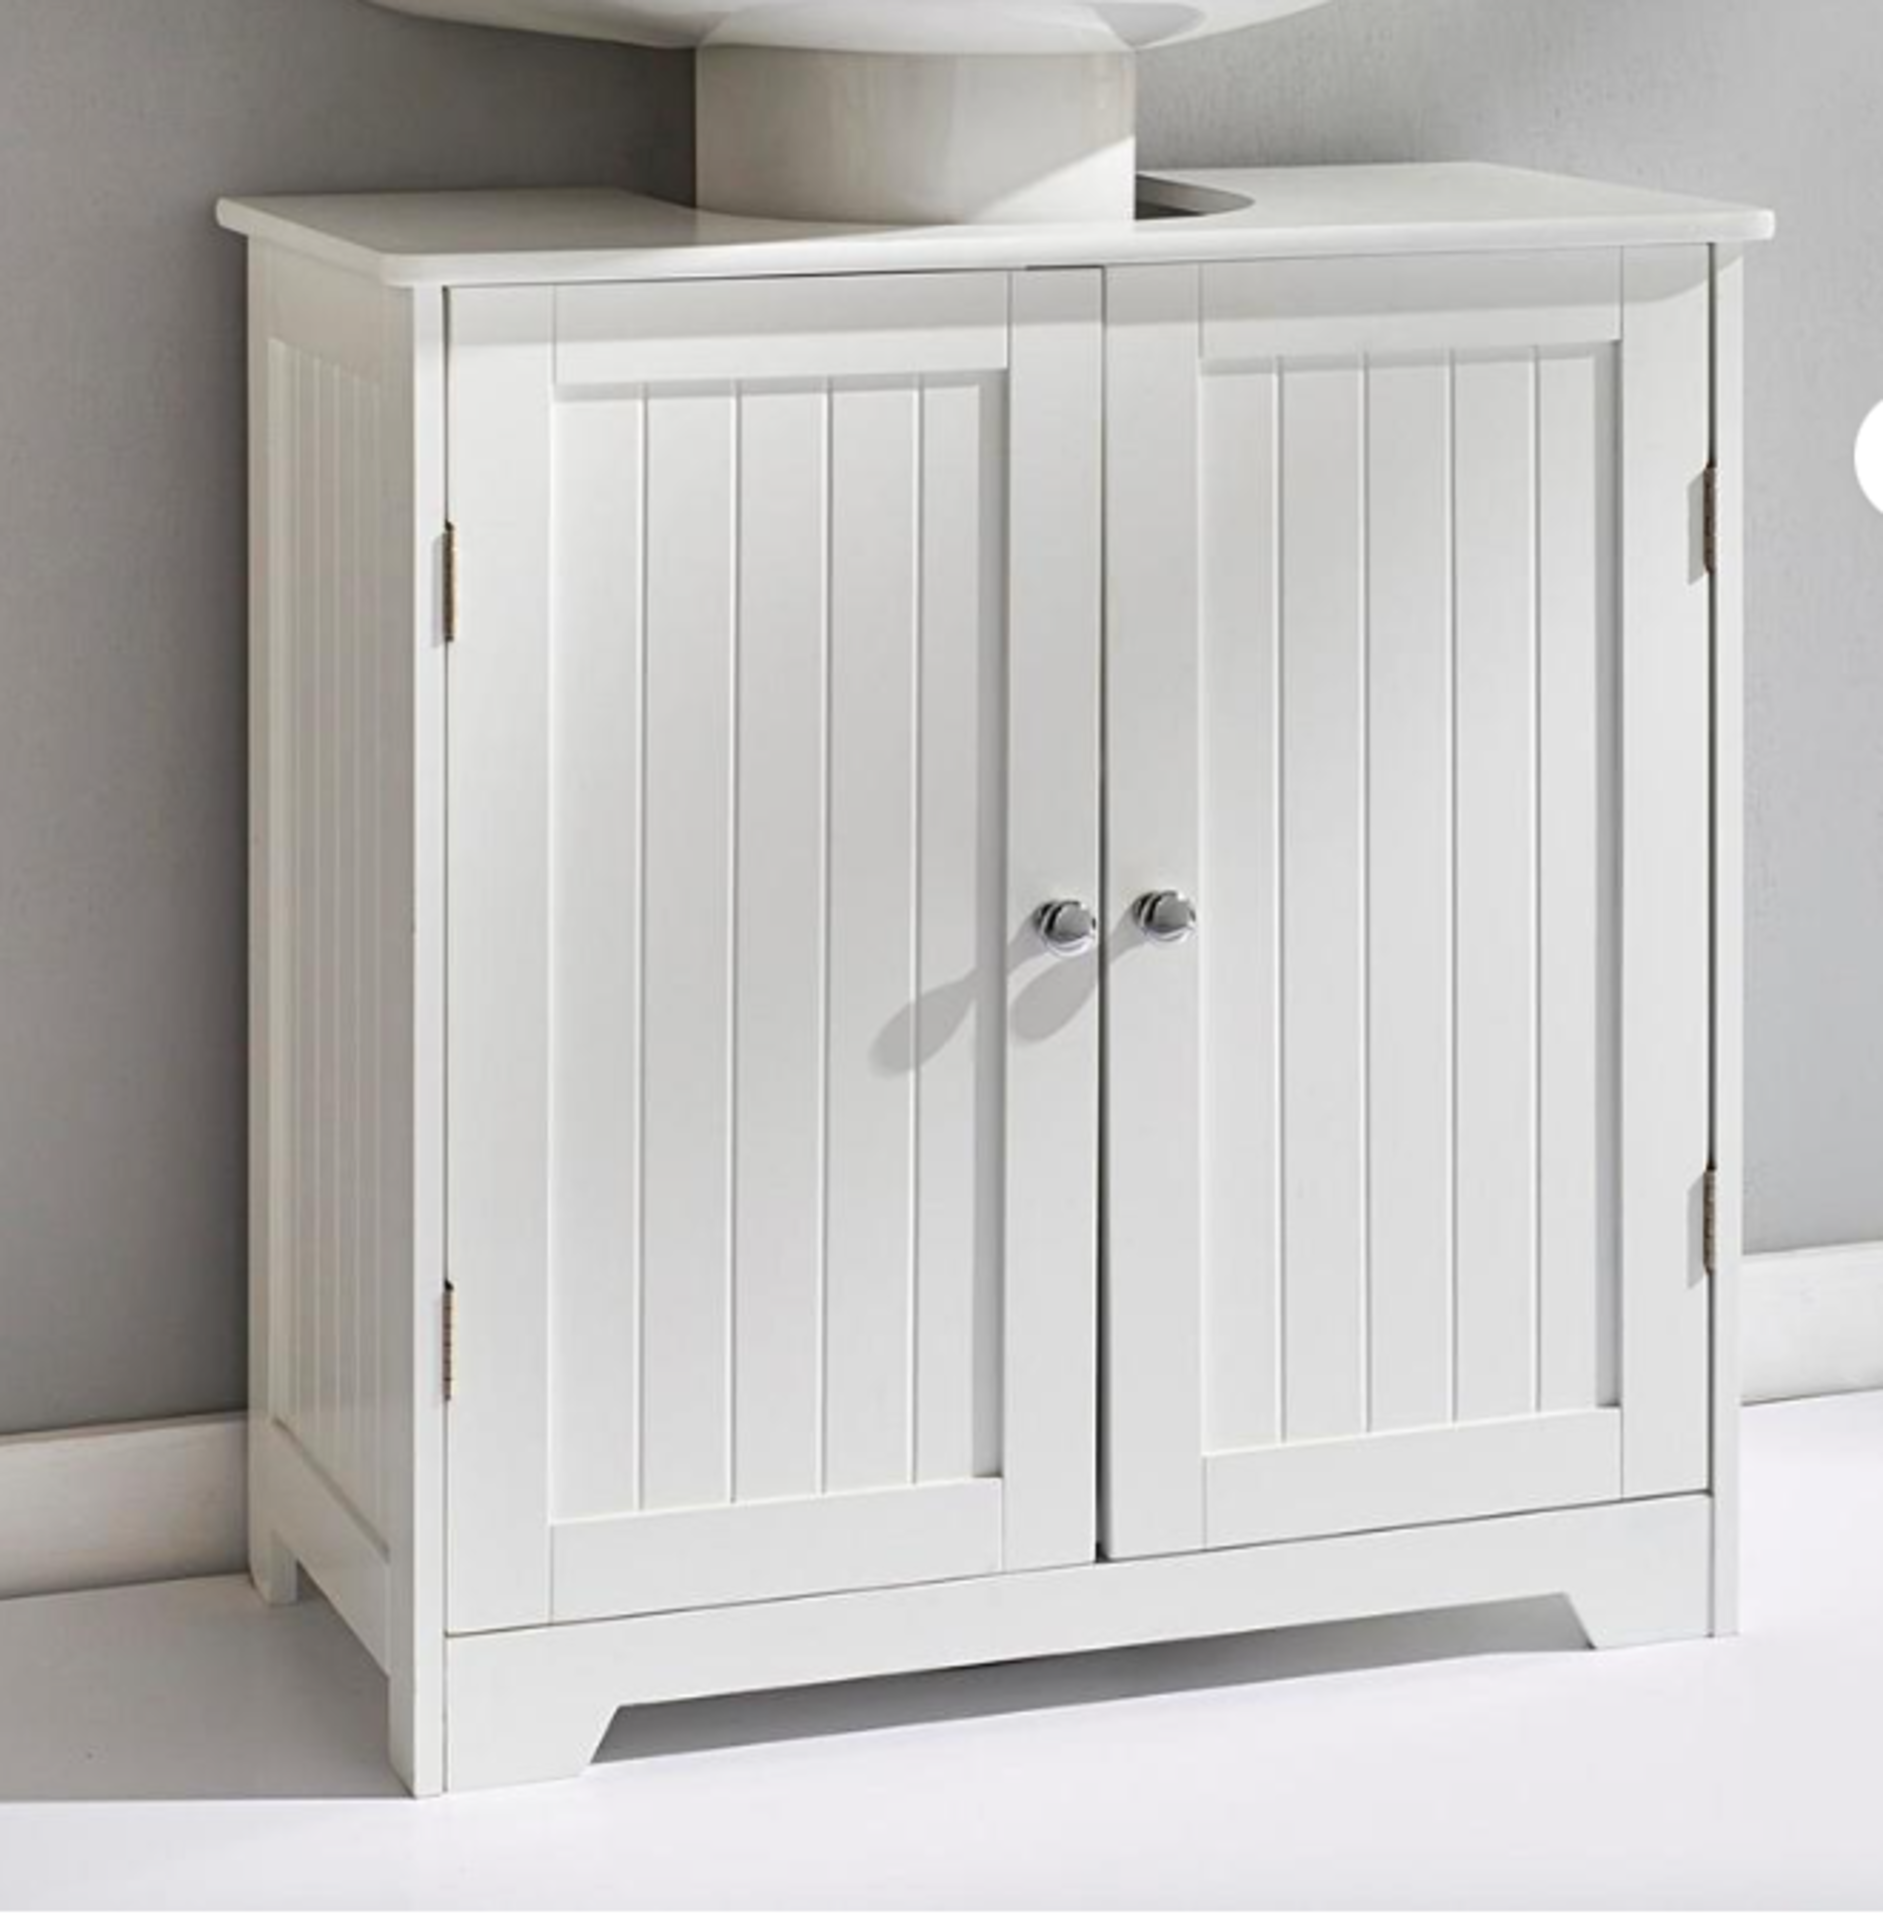 New England Underbasin Cupboard. - ER20. Great value, easy to assemble, stylish shaker-style